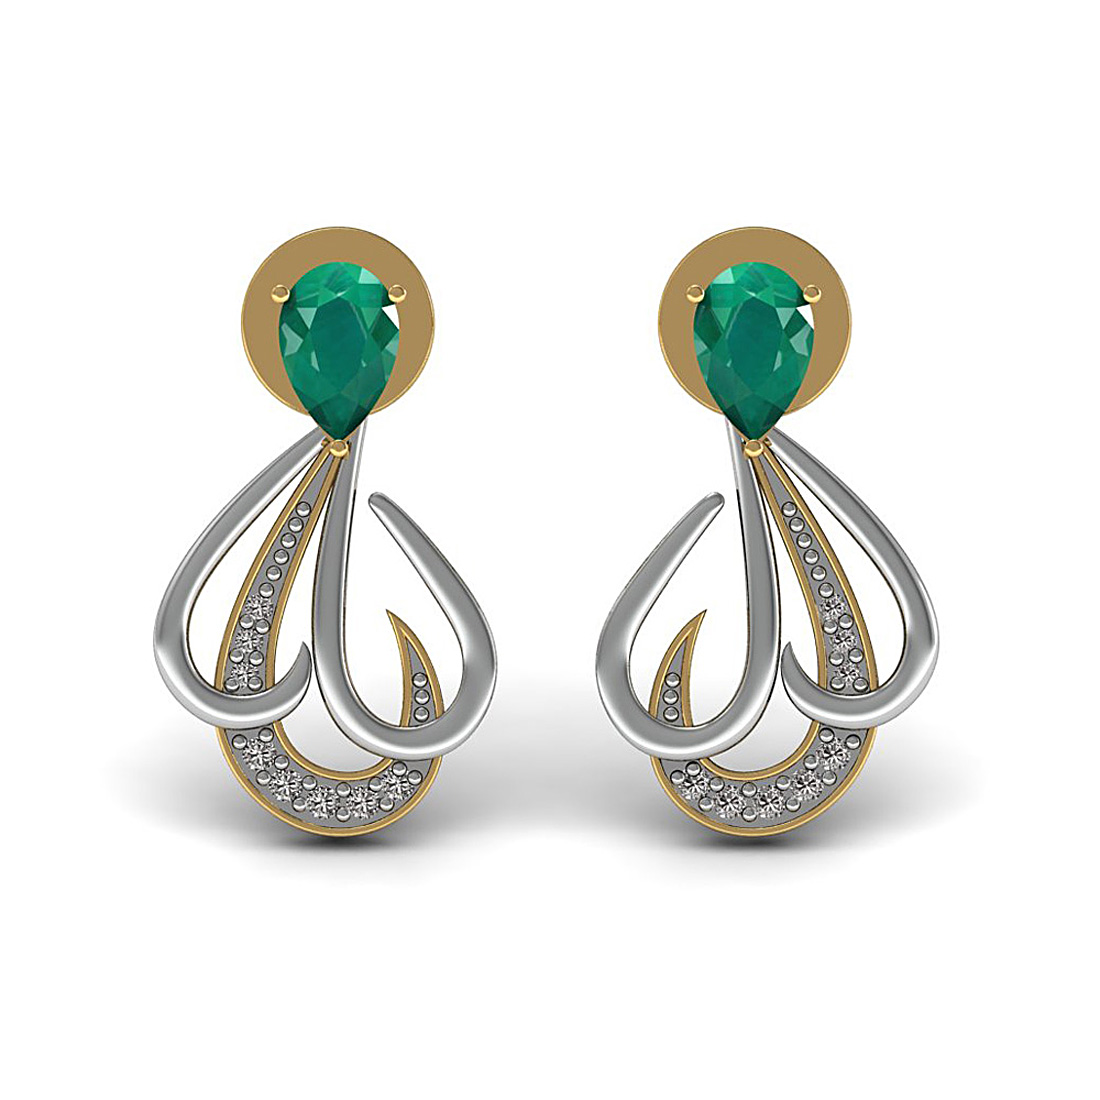 18k solid gold stud earrings with real diamond & emerald